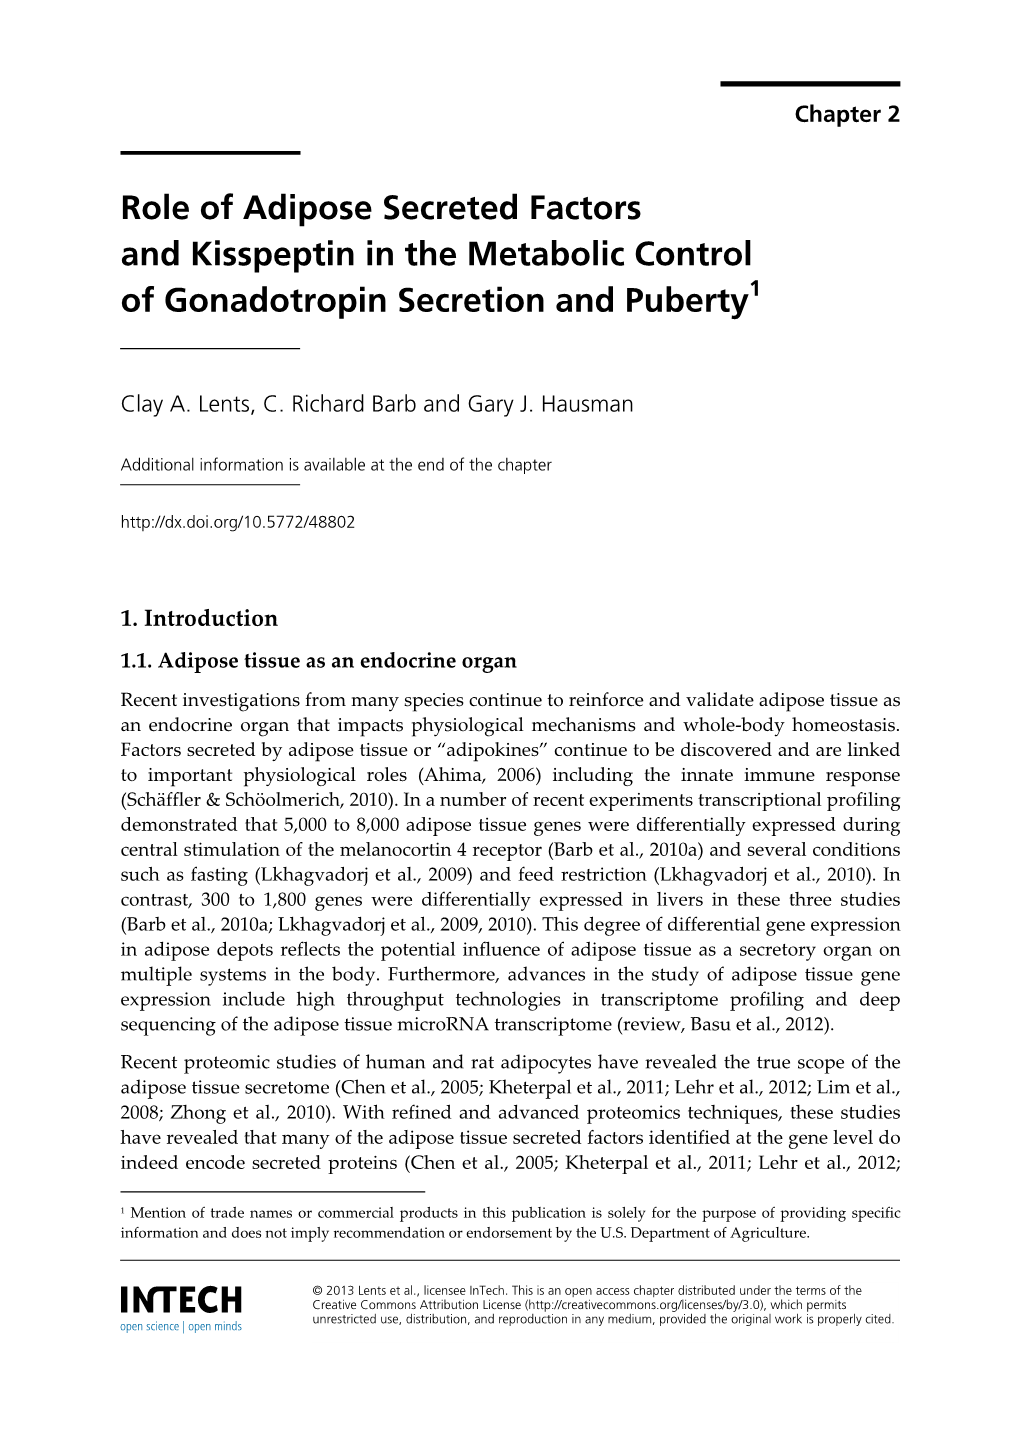 Role of Adipose Secreted Factors and Kisspeptin in the Metabolic Control of Gonadotropin Secretion and Puberty1